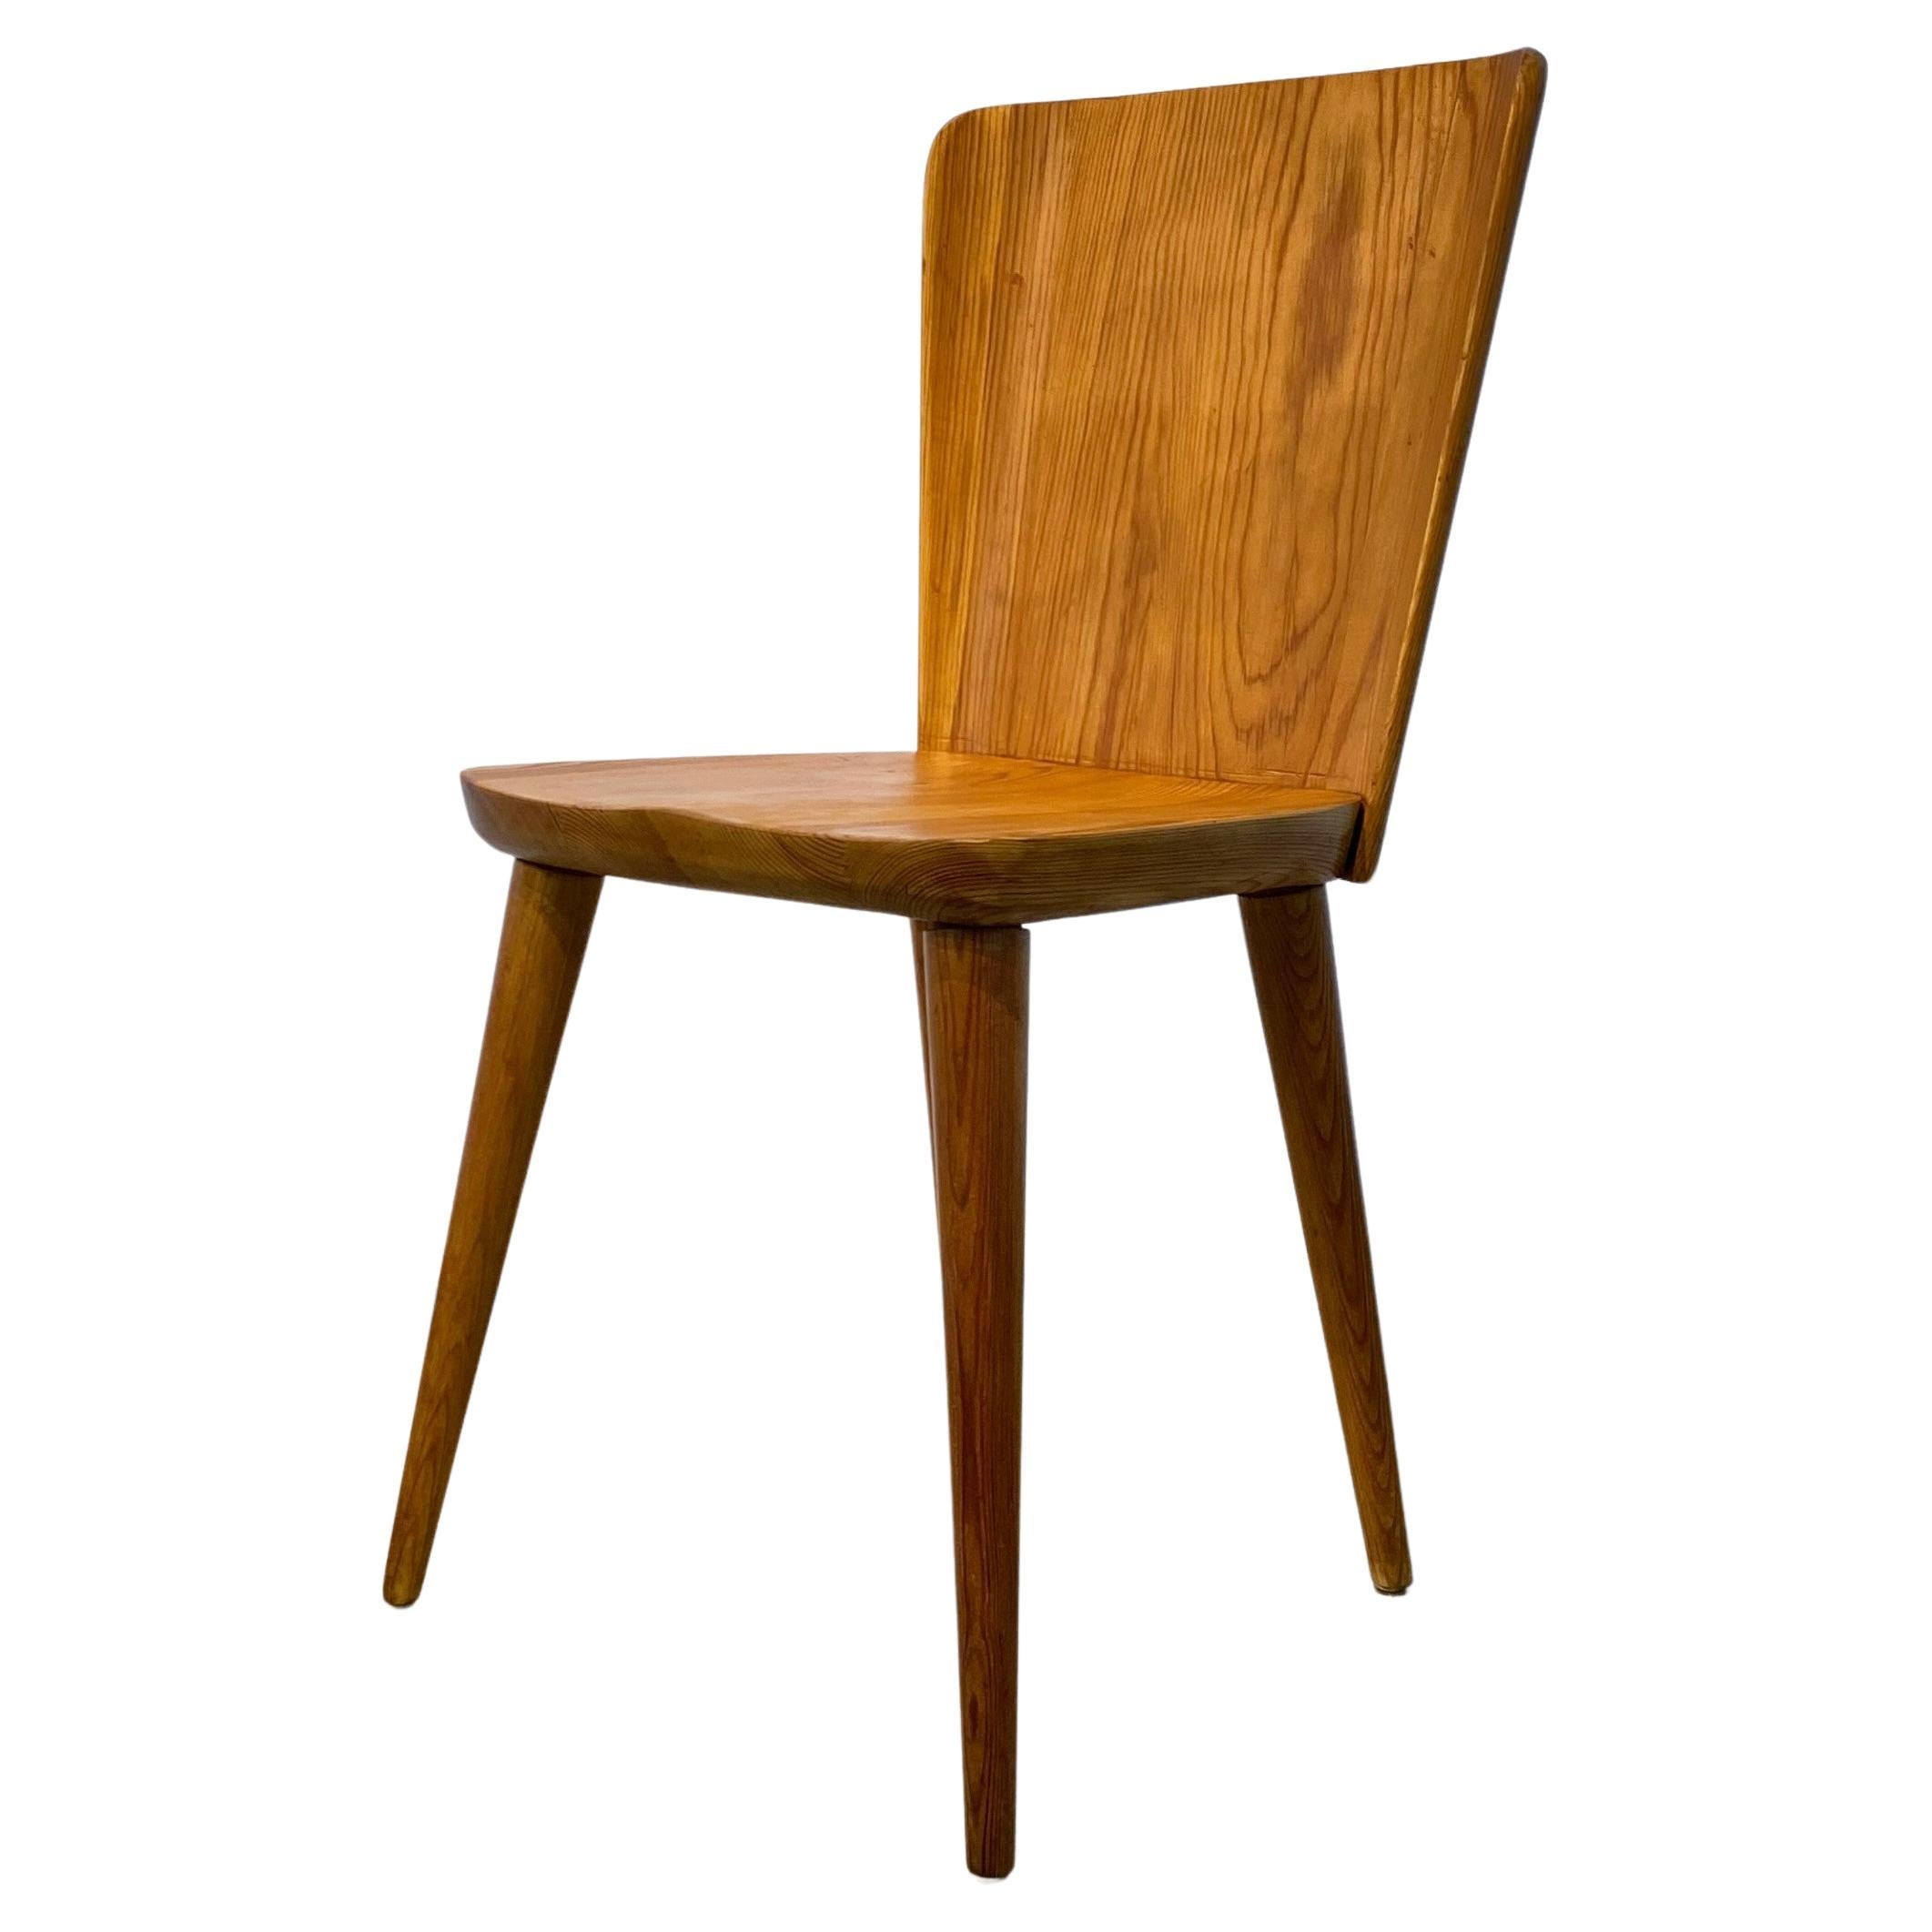 Göran Malmvall pine chair 510 by Karl Andersson & Söner, Sweden, 1940s For Sale